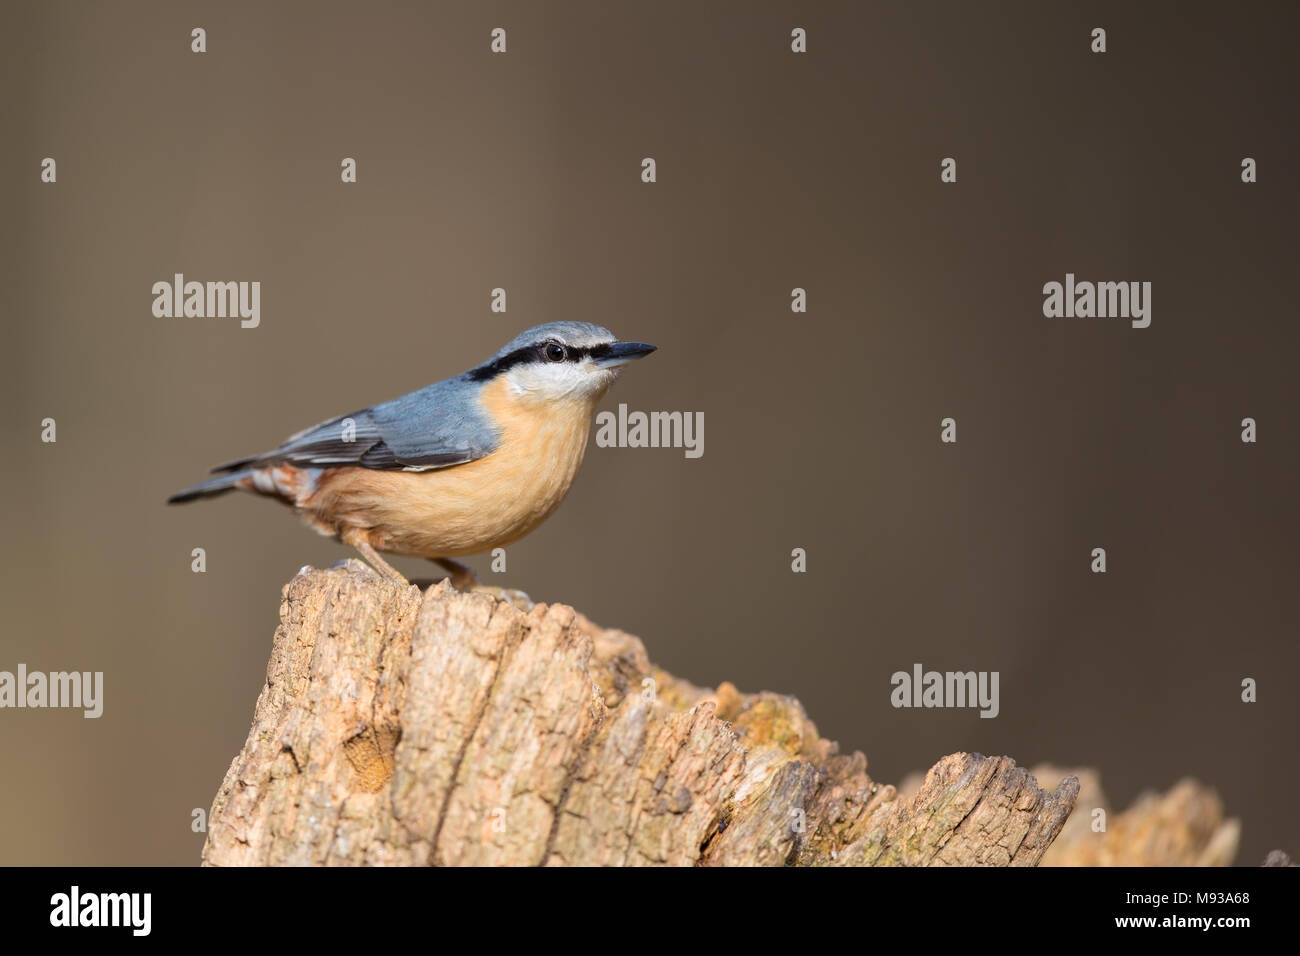 Nuthatch perched on an old wooden tree stump Stock Photo